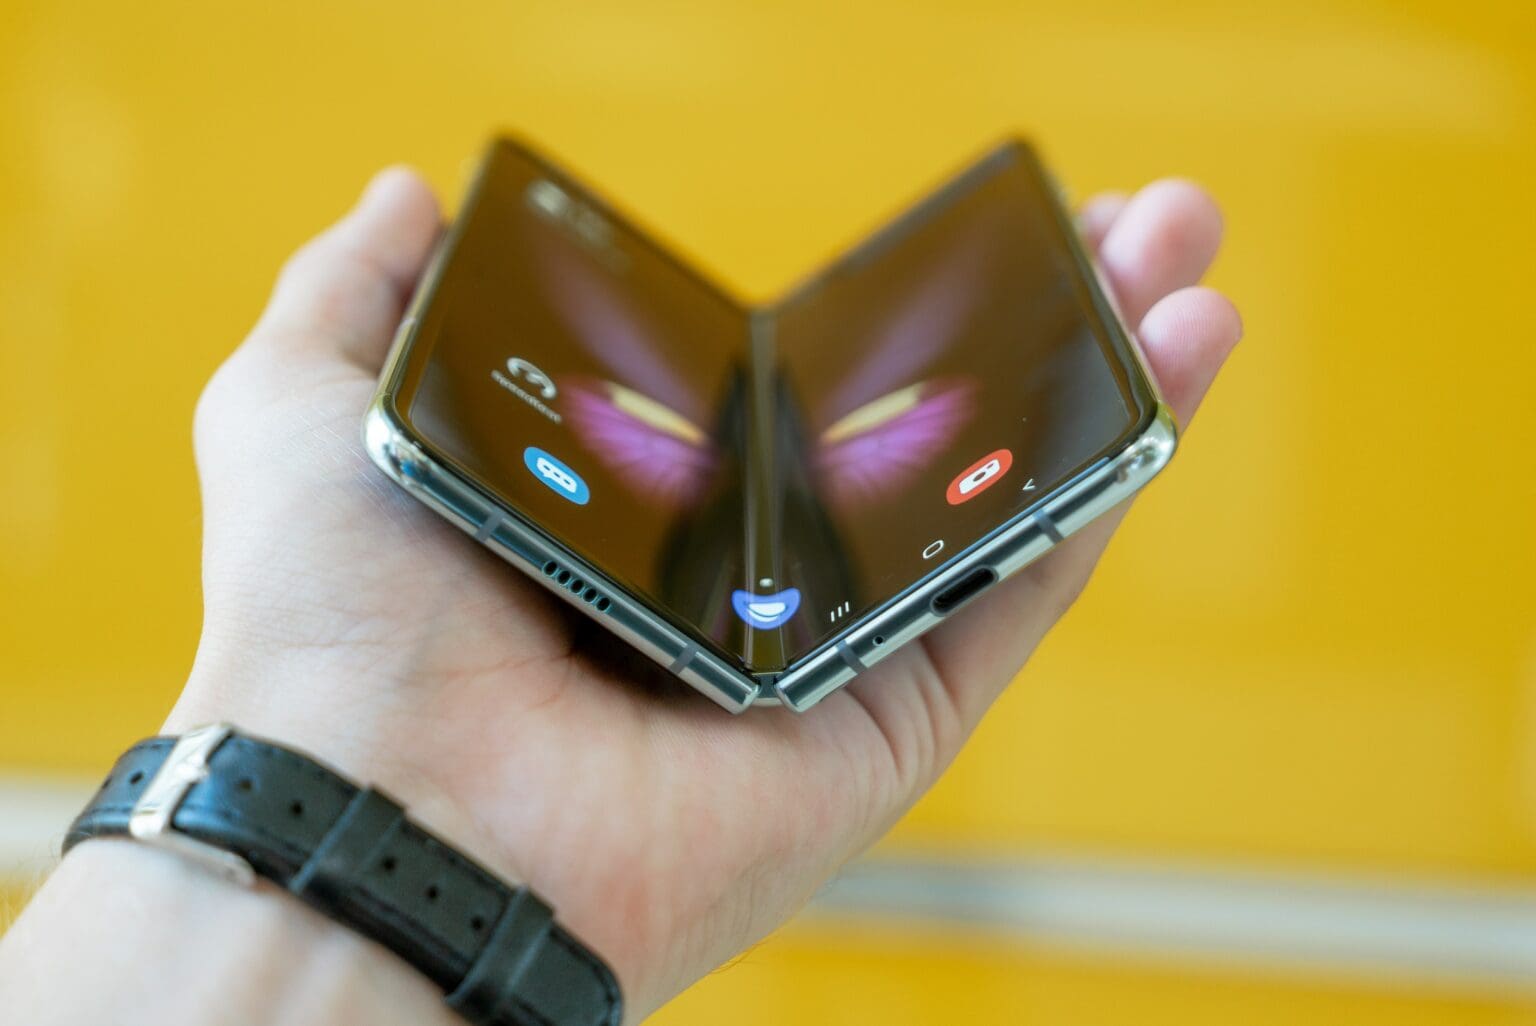 Why should Android users have all the folding fun?